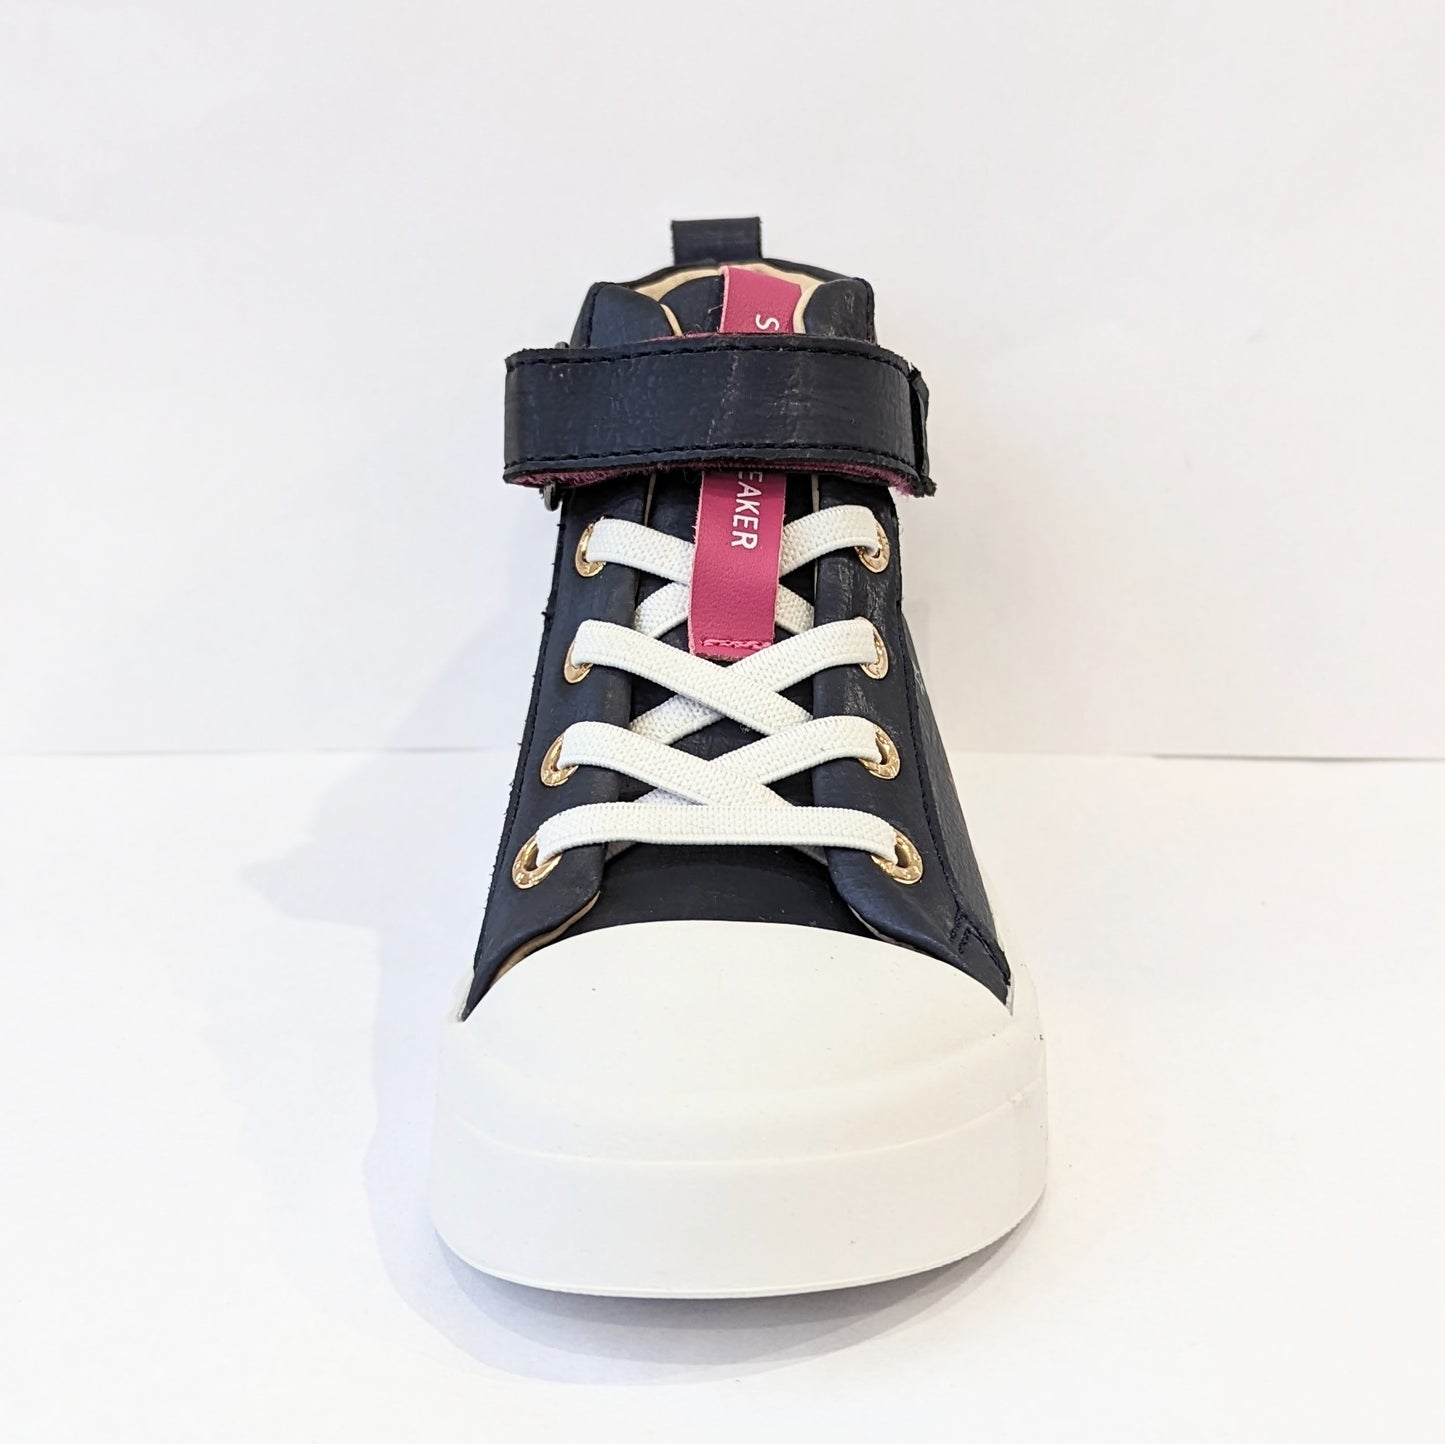 A girls hi-top boot by Shoesme, style SH23S008-C, in navy with unicorn detail and lace/velcro fastening. Front view.